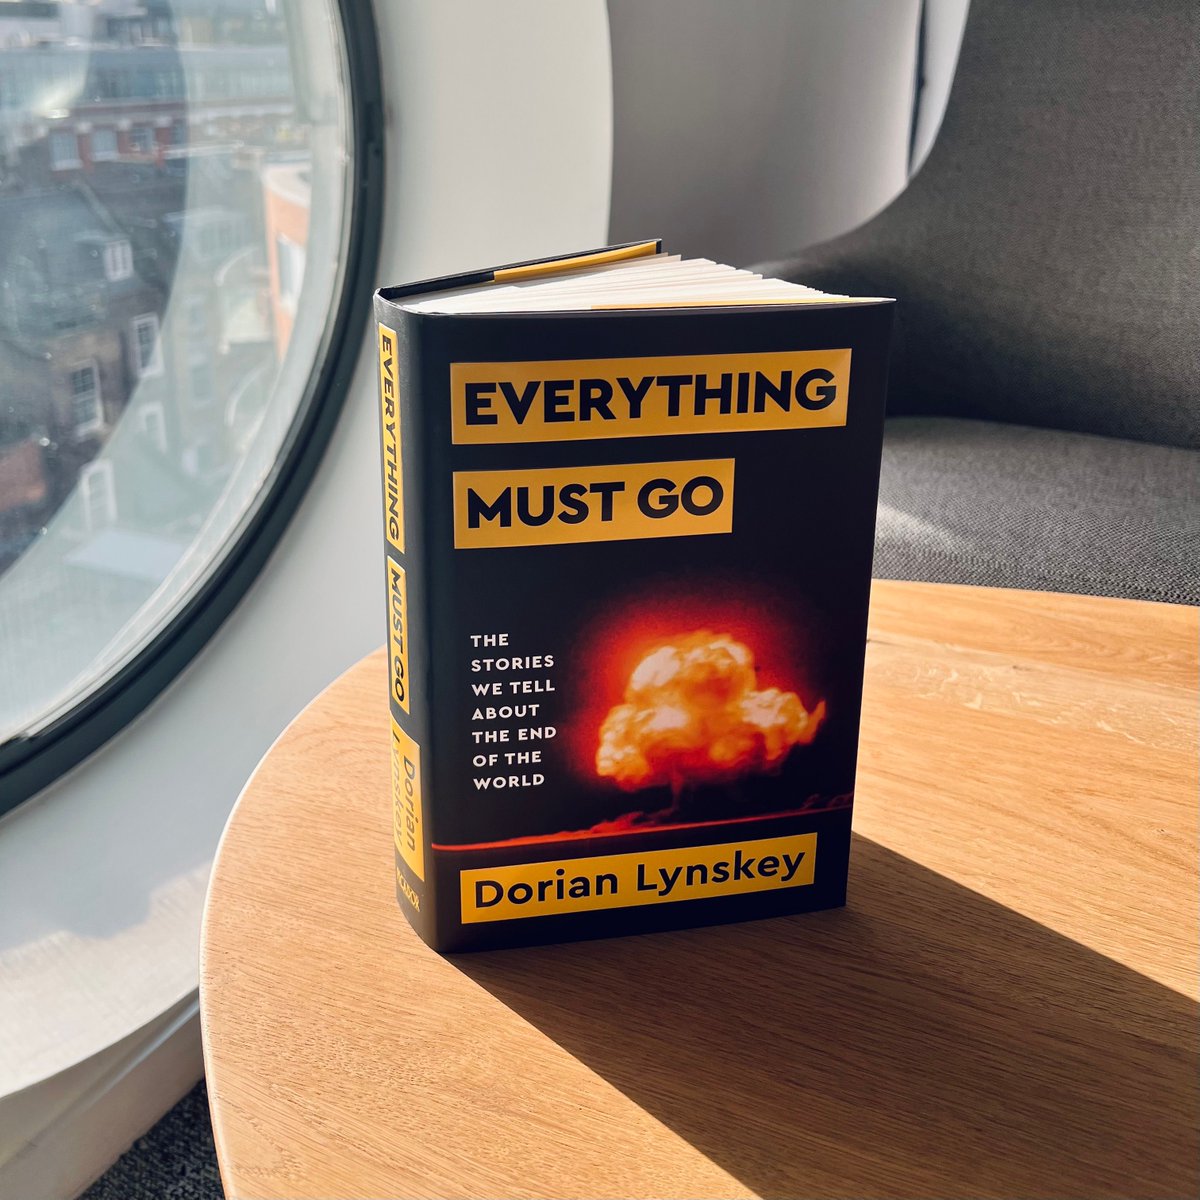 ☢️ Happy publication day to @Dorianlynskey with Everything Must Go: The Stories We Tell About the End of the World, a cultural history that weaves together politics, history, science, high and popular culture in a book that is deeply illuminating about both us and our times.